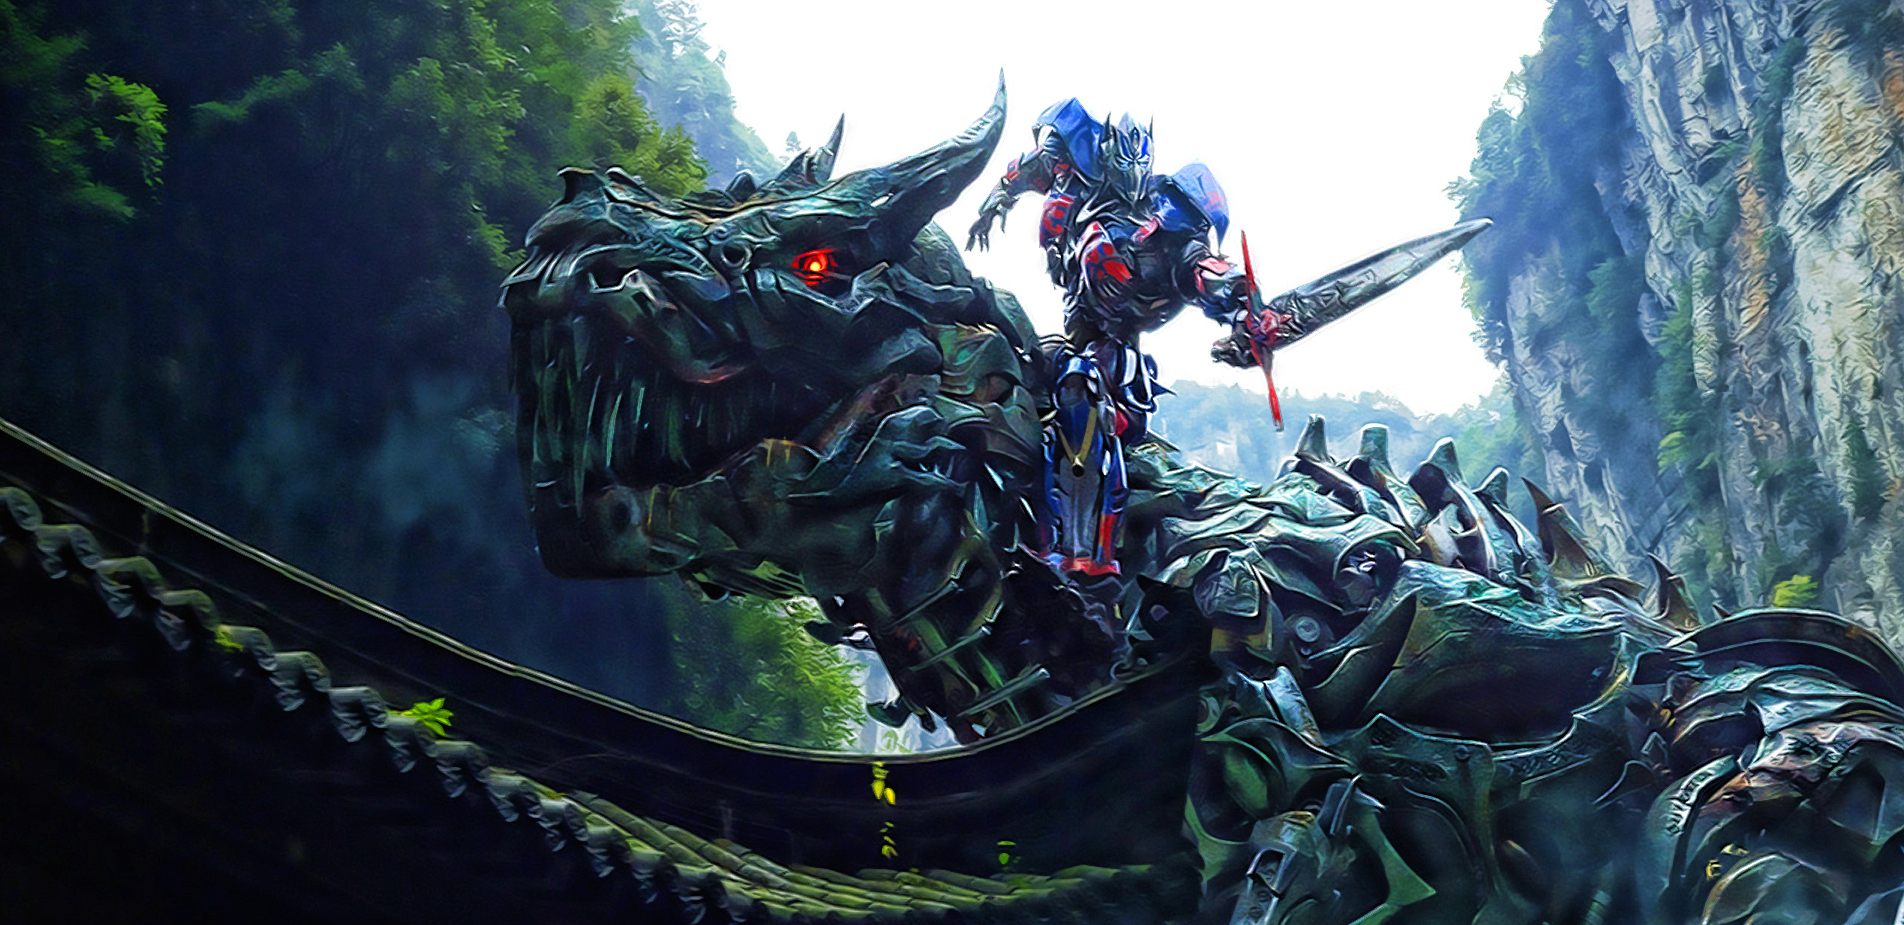 Transformers Age Of Extinction Wallpapers 001 - Transformers 4 - HD Wallpaper 